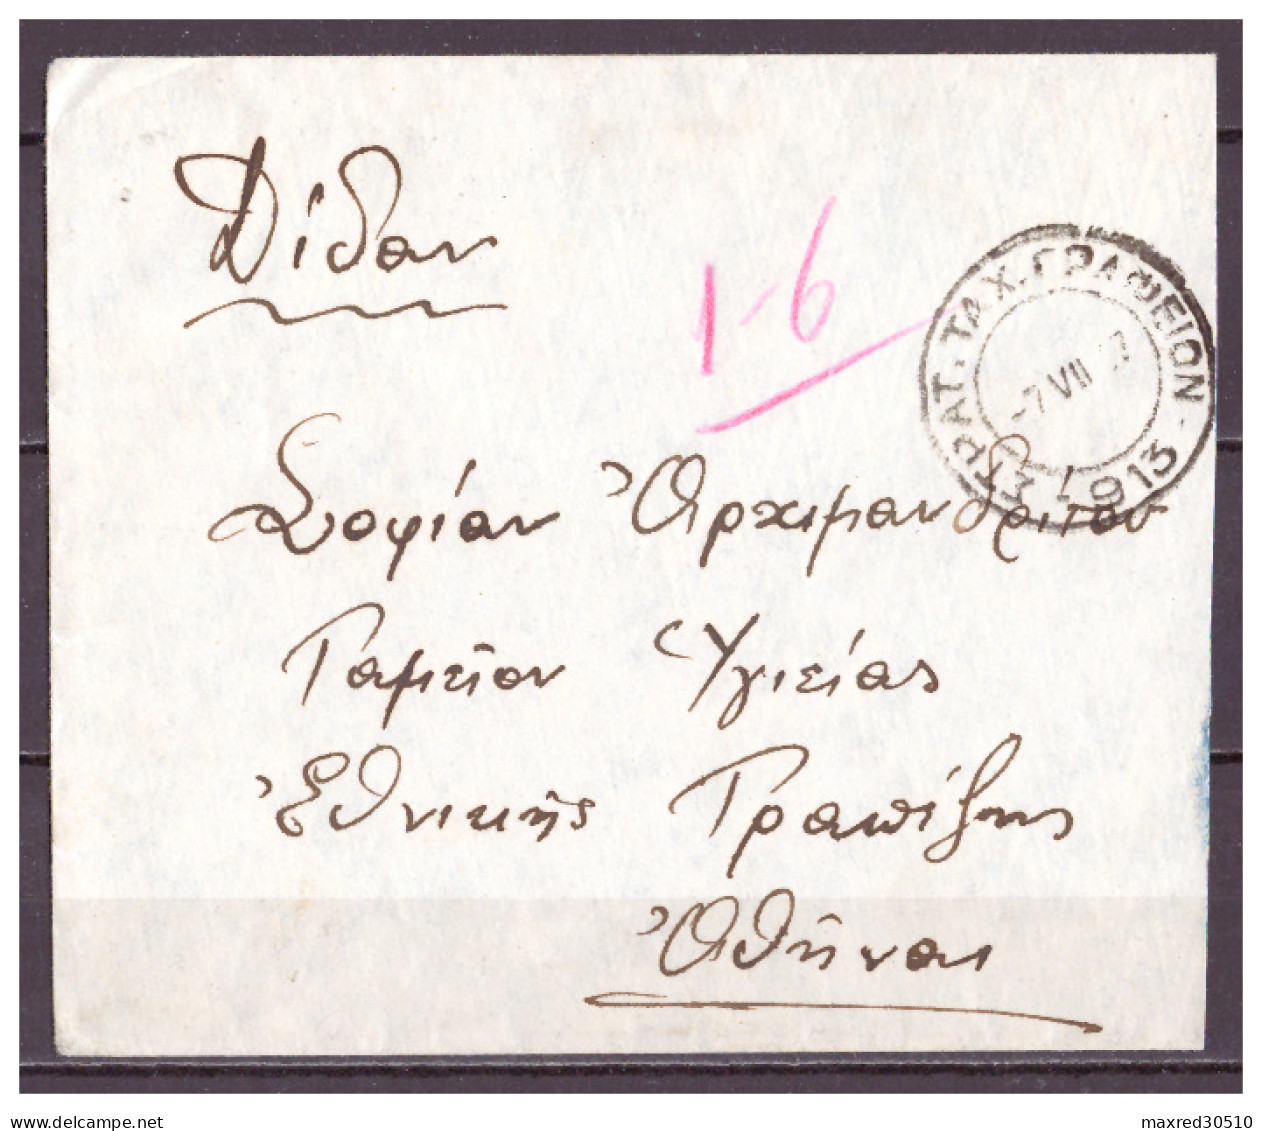 GREECE 1947 MILITARY CENSORED COVER CANCELLED "913 MILITARY POST OFFICE" TO ATHENS + "105 FIELD ARTILLERY REGIMENT" VF - Flammes & Oblitérations